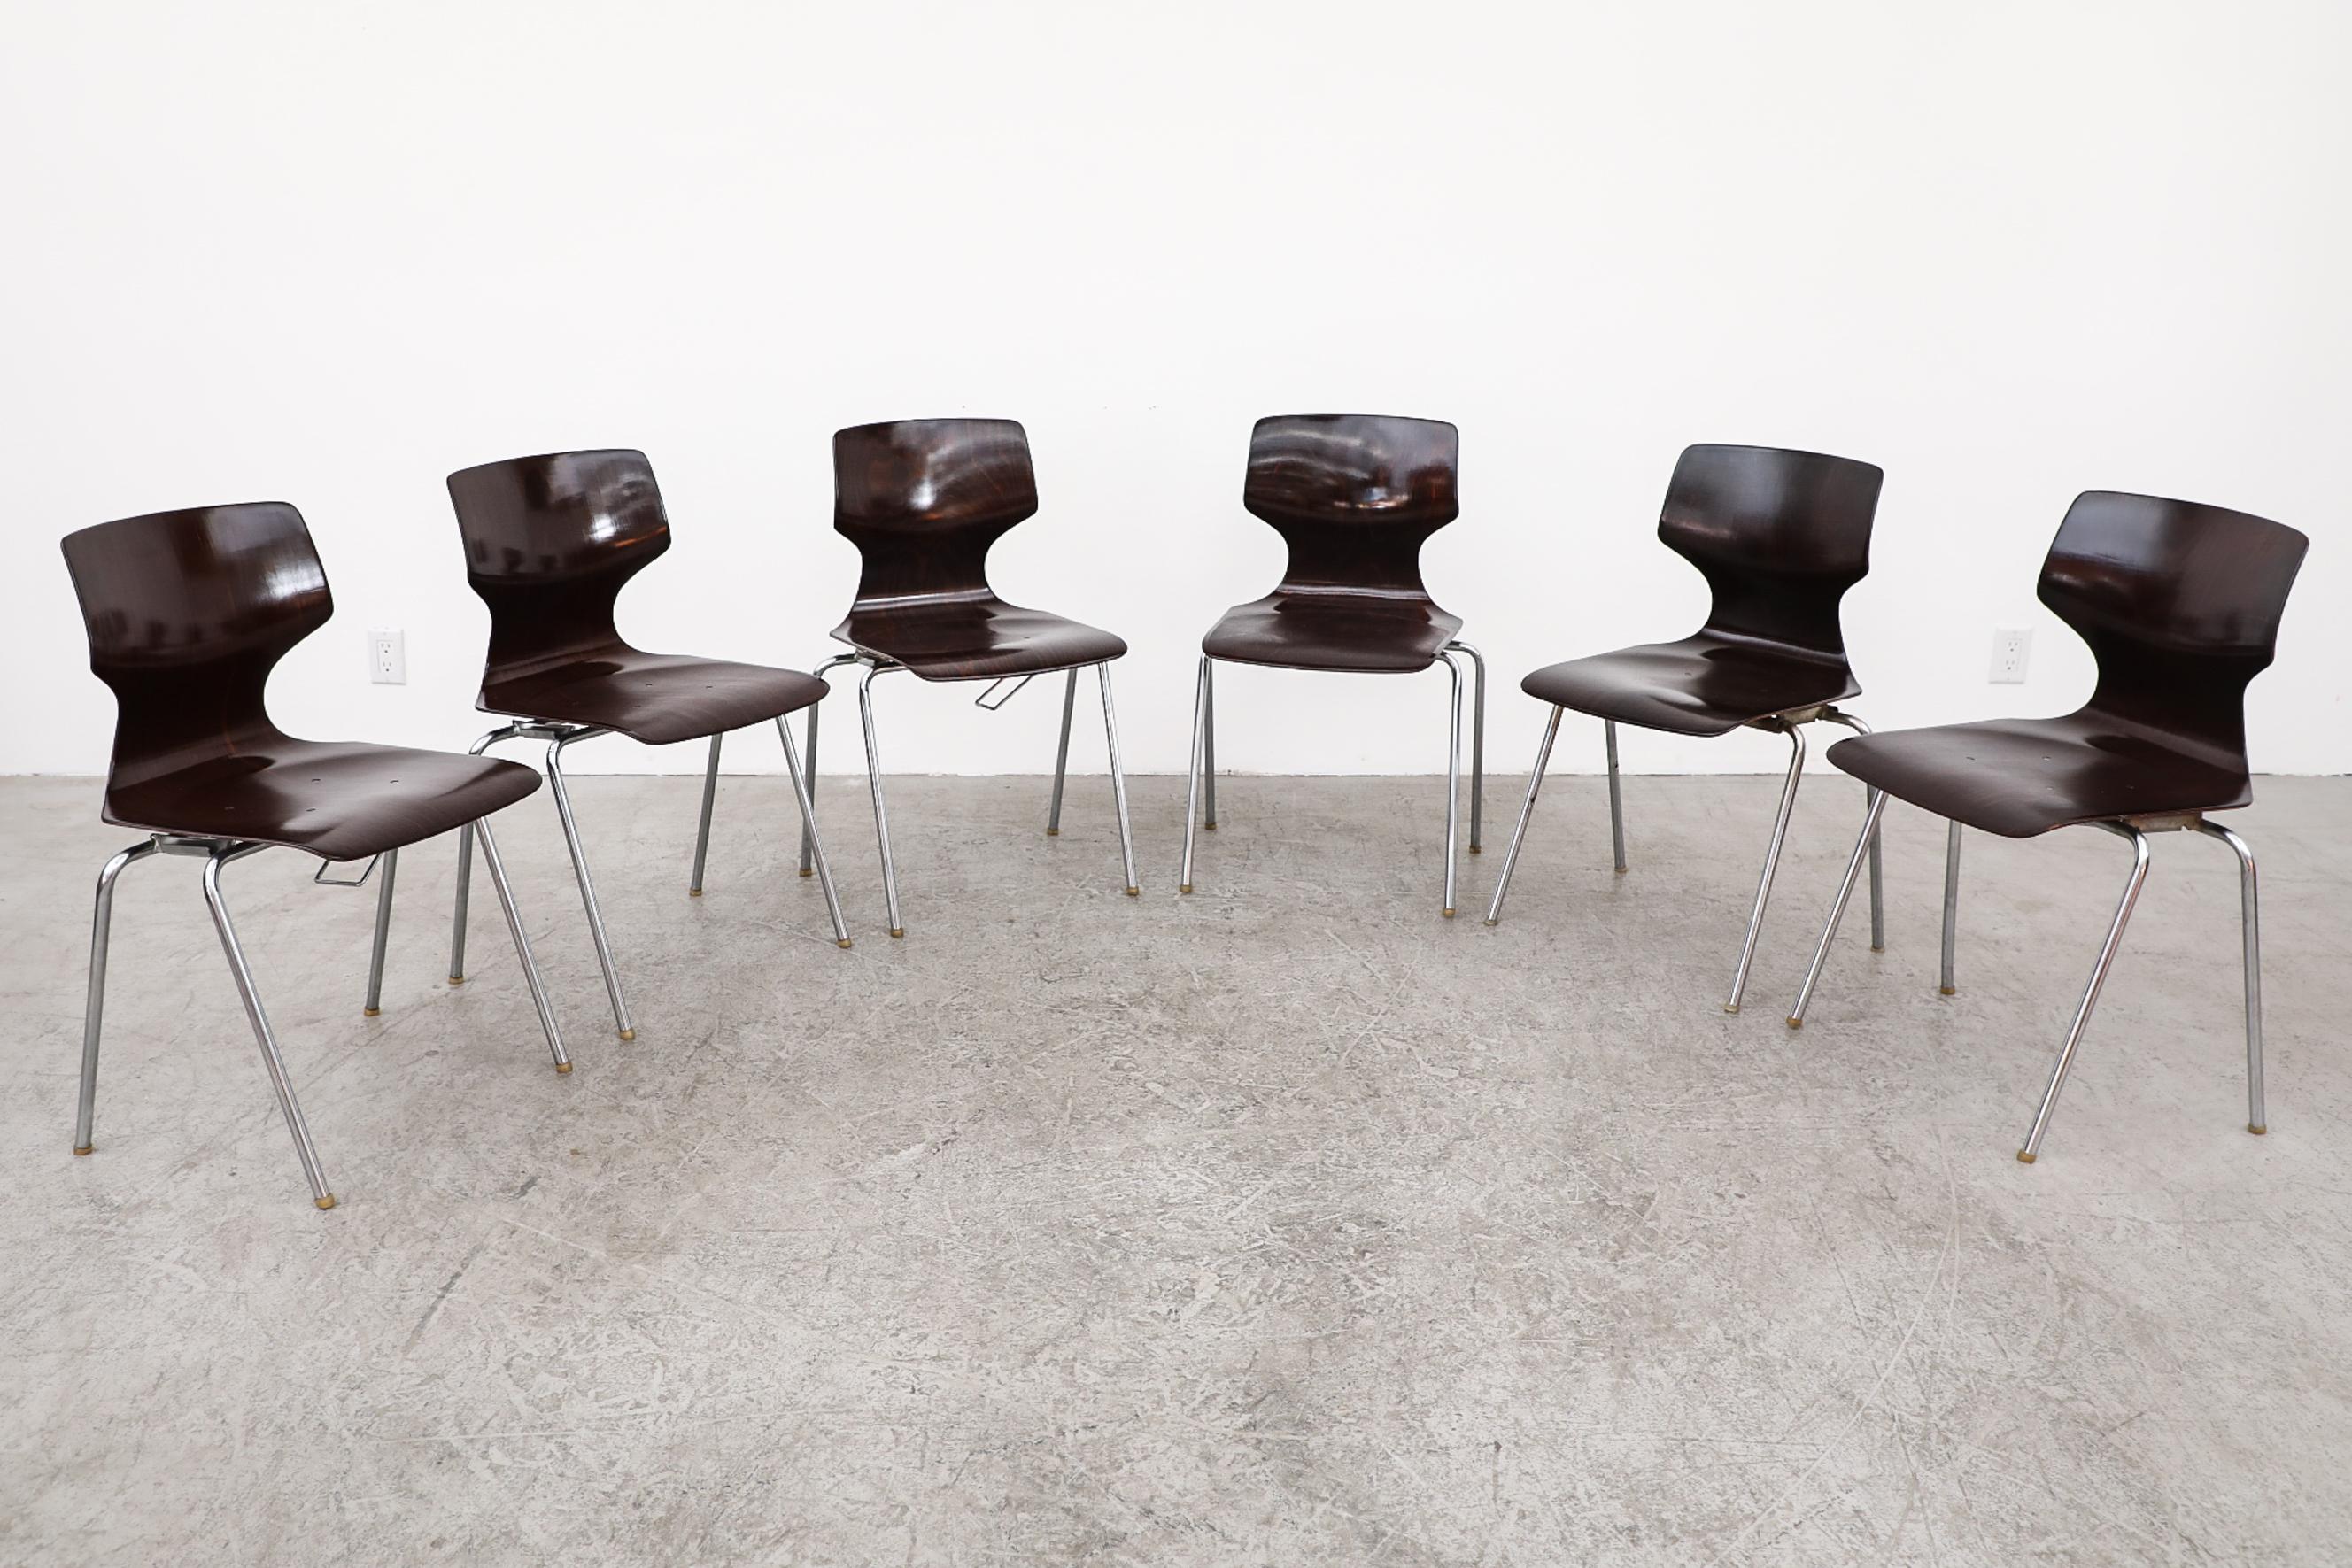 1970s Dark stained wingback stacking chairs by Flötotto. These chairs have a single shell seat with chrome legs. Each chair has a hook on one side so they can be attached to make a bench. Seat shells vary in color from dark brown to a darker